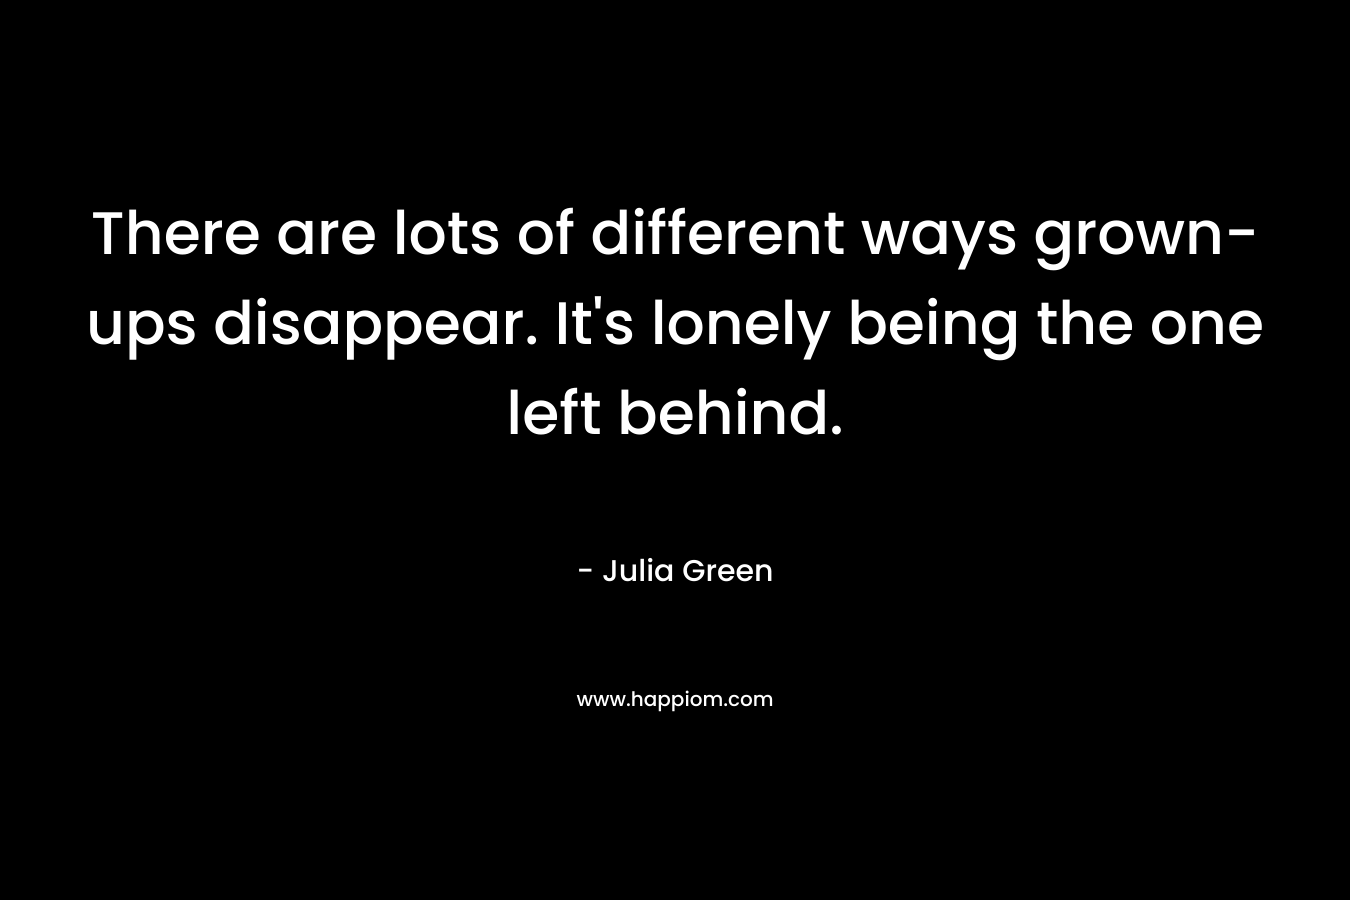 There are lots of different ways grown-ups disappear. It’s lonely being the one left behind. – Julia Green